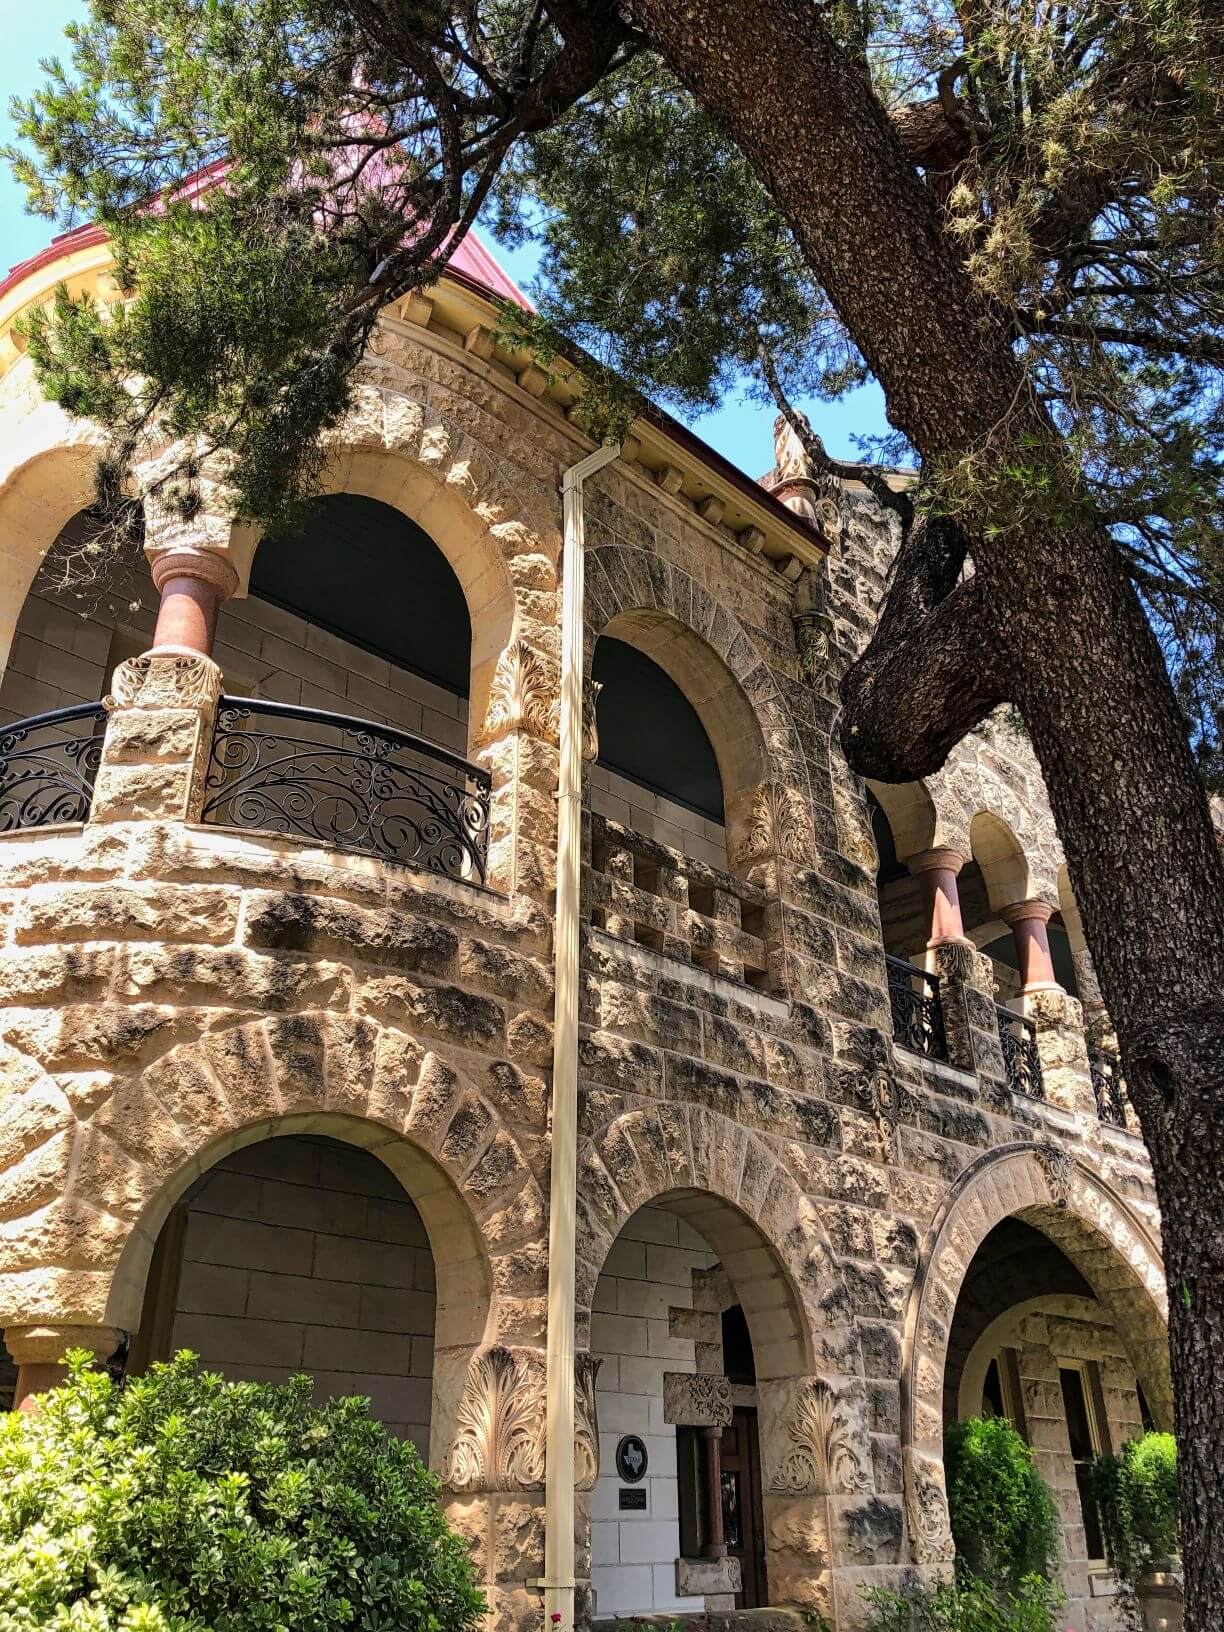 Limestone two story building with arches